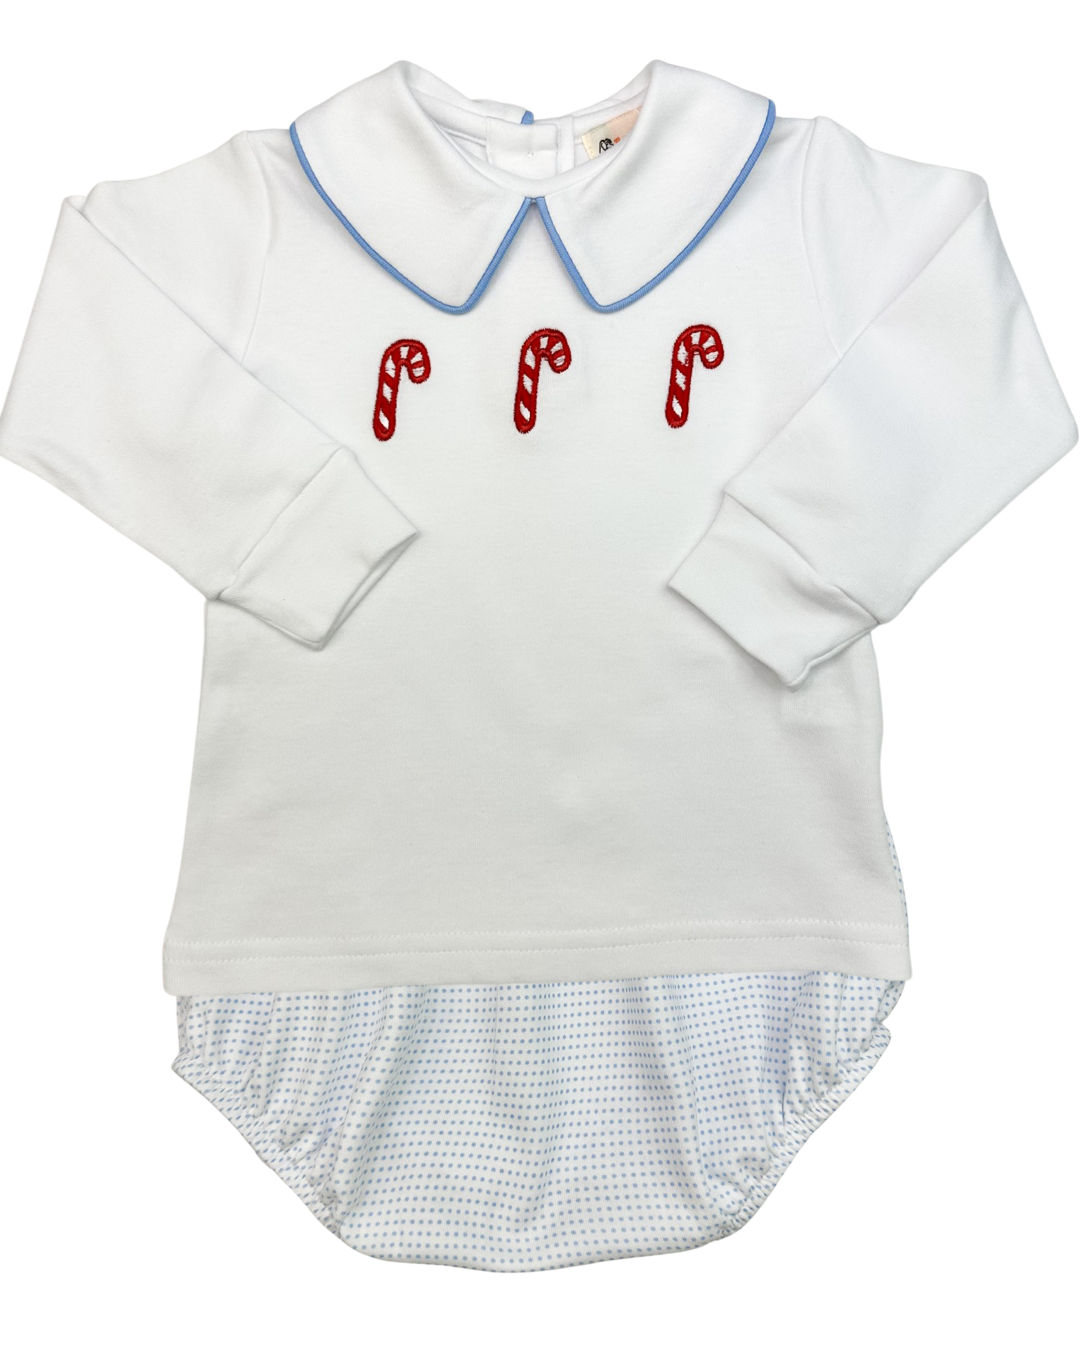 Candy Canes Bloomer Set (12M,18M,24M,2T)